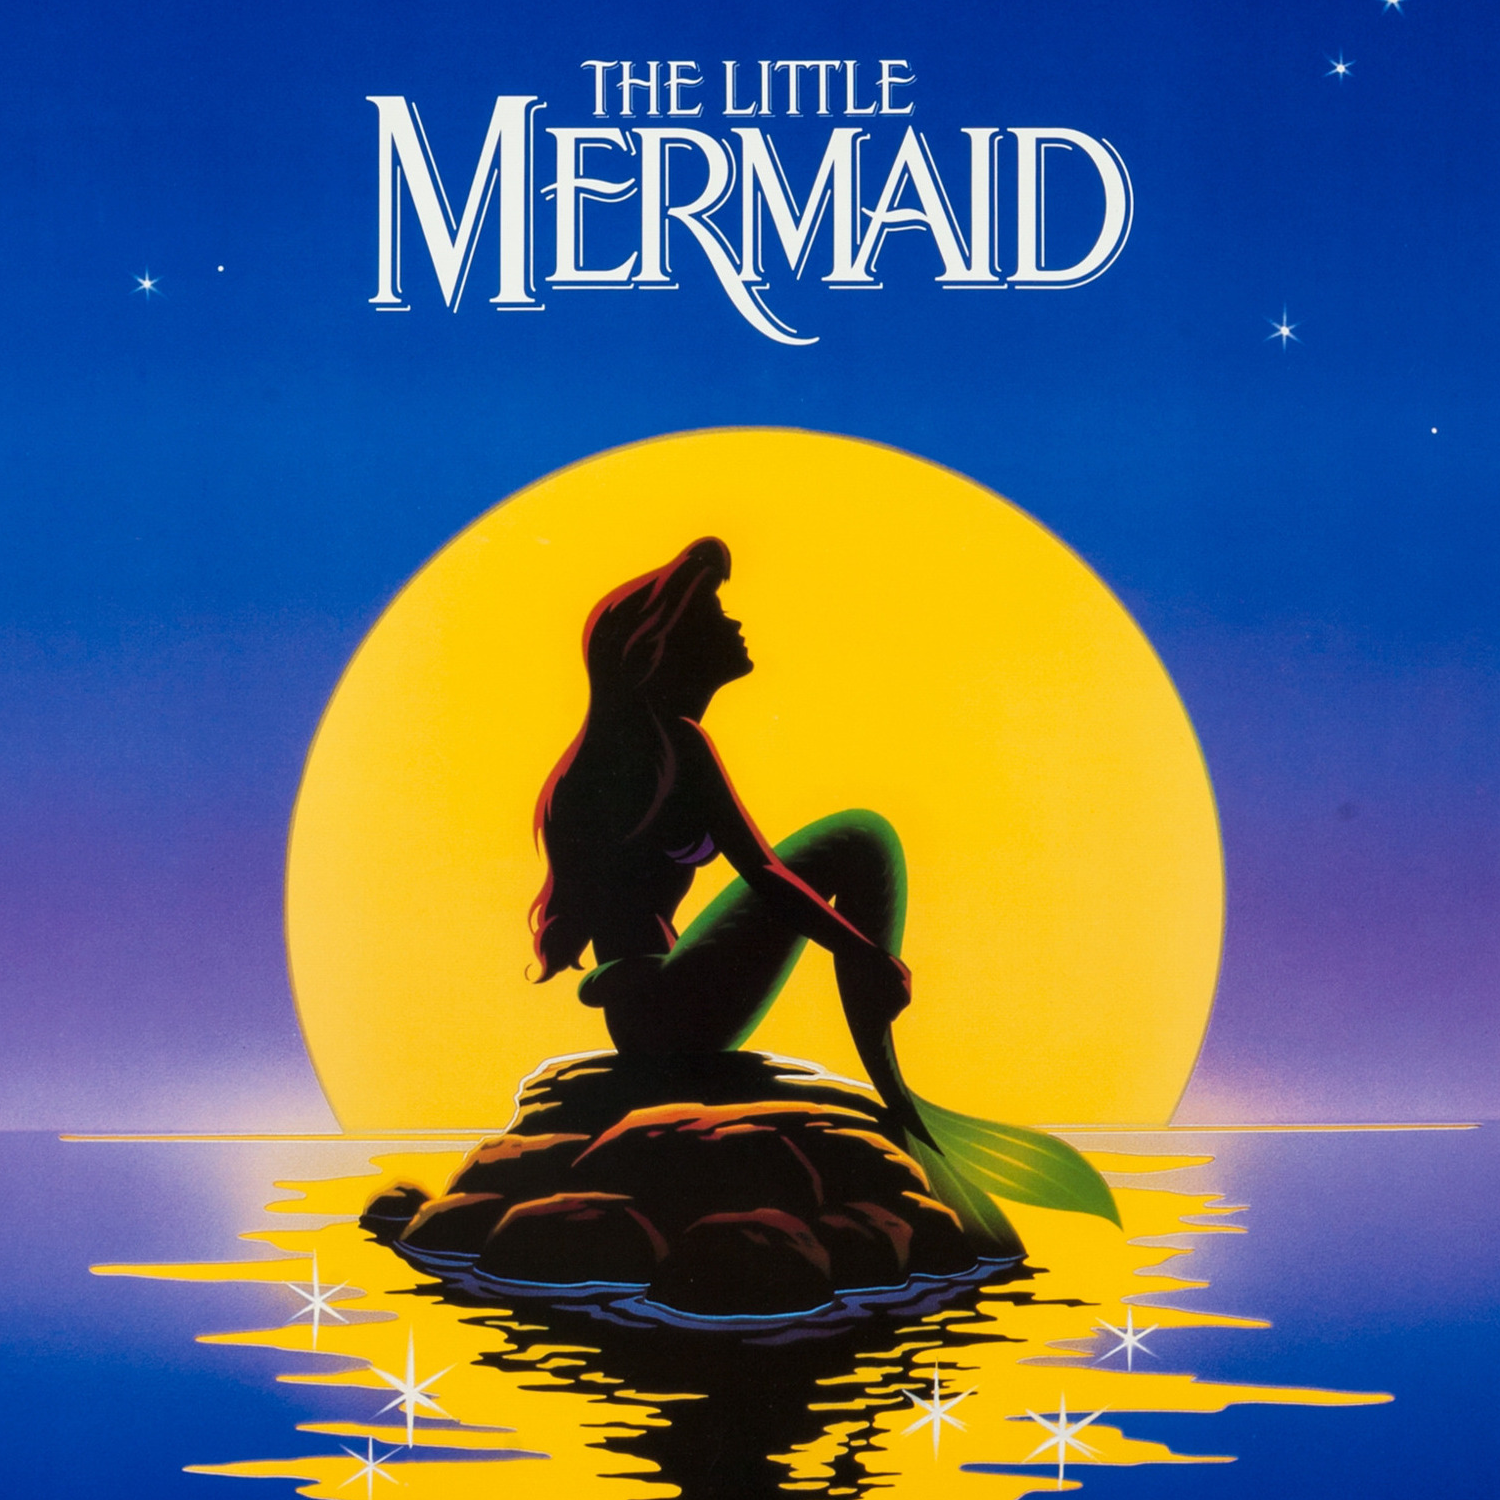 The Little Mermaid (1989) Review